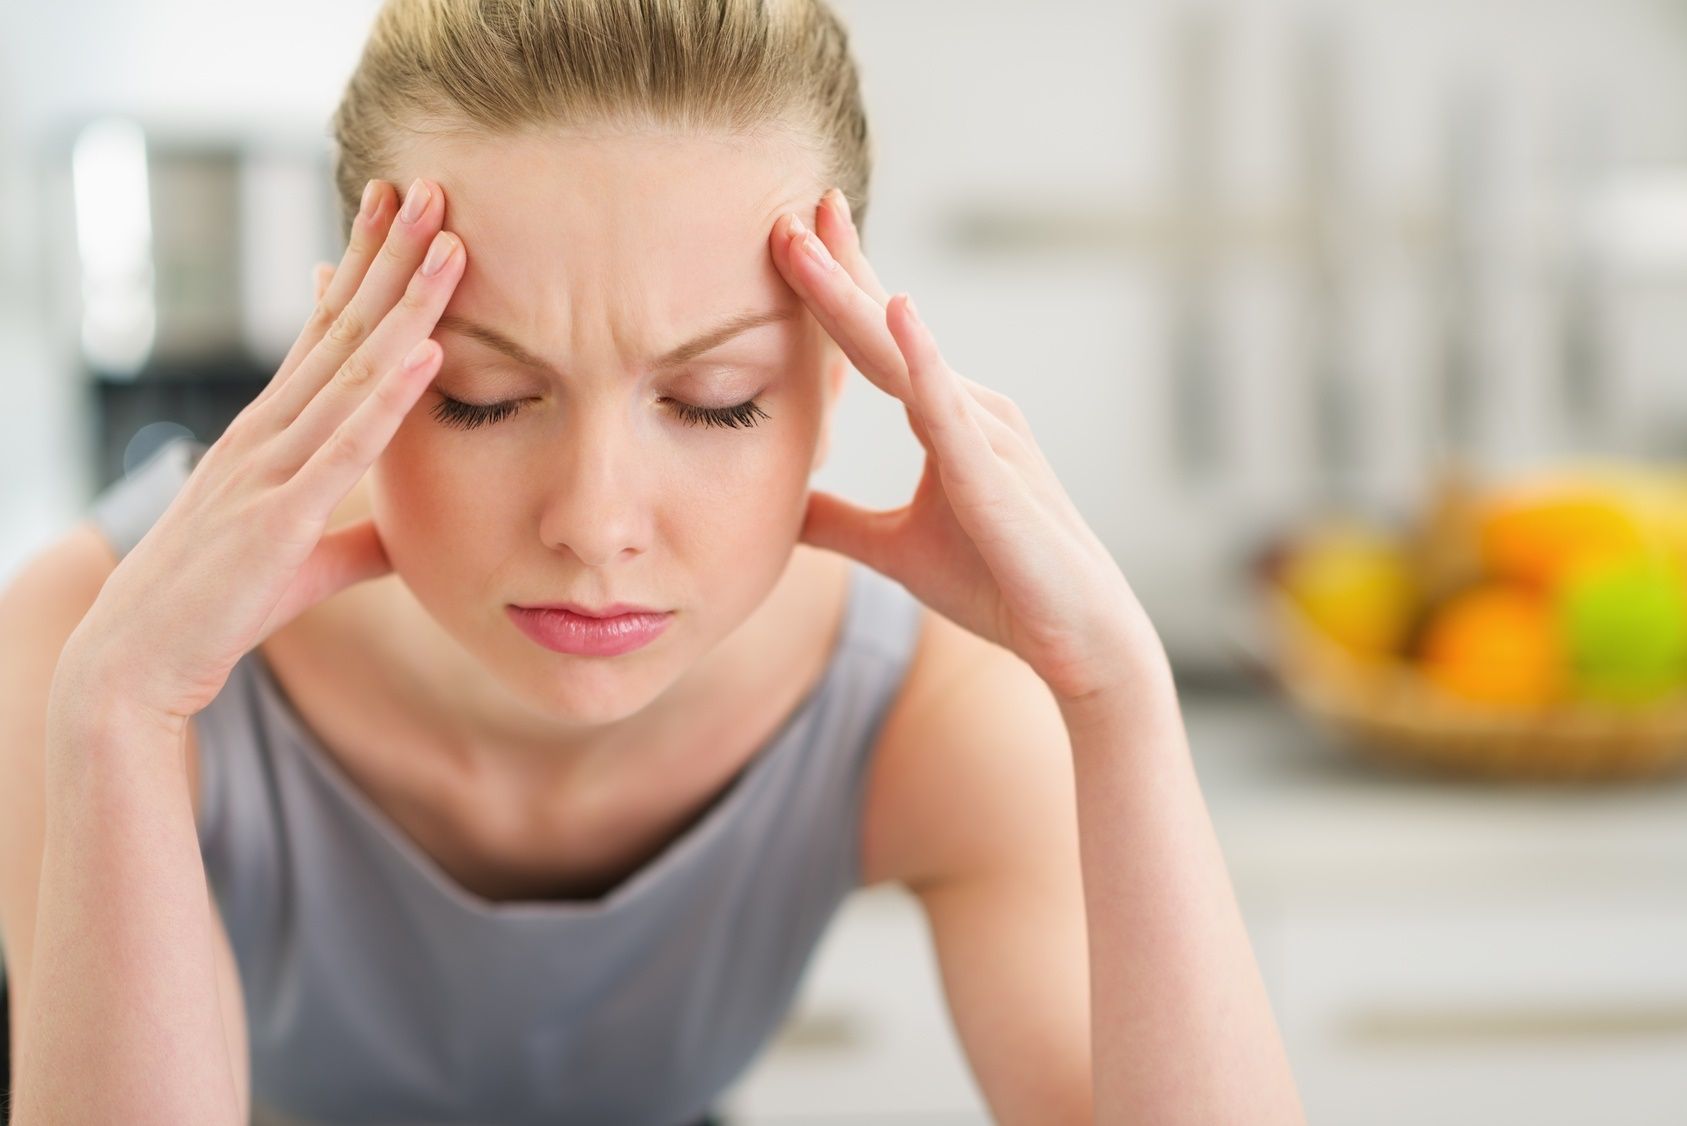 http://expertbeacon.com/managing-migraine-triggers-and-help-getting-treatment/ | expertbeacon